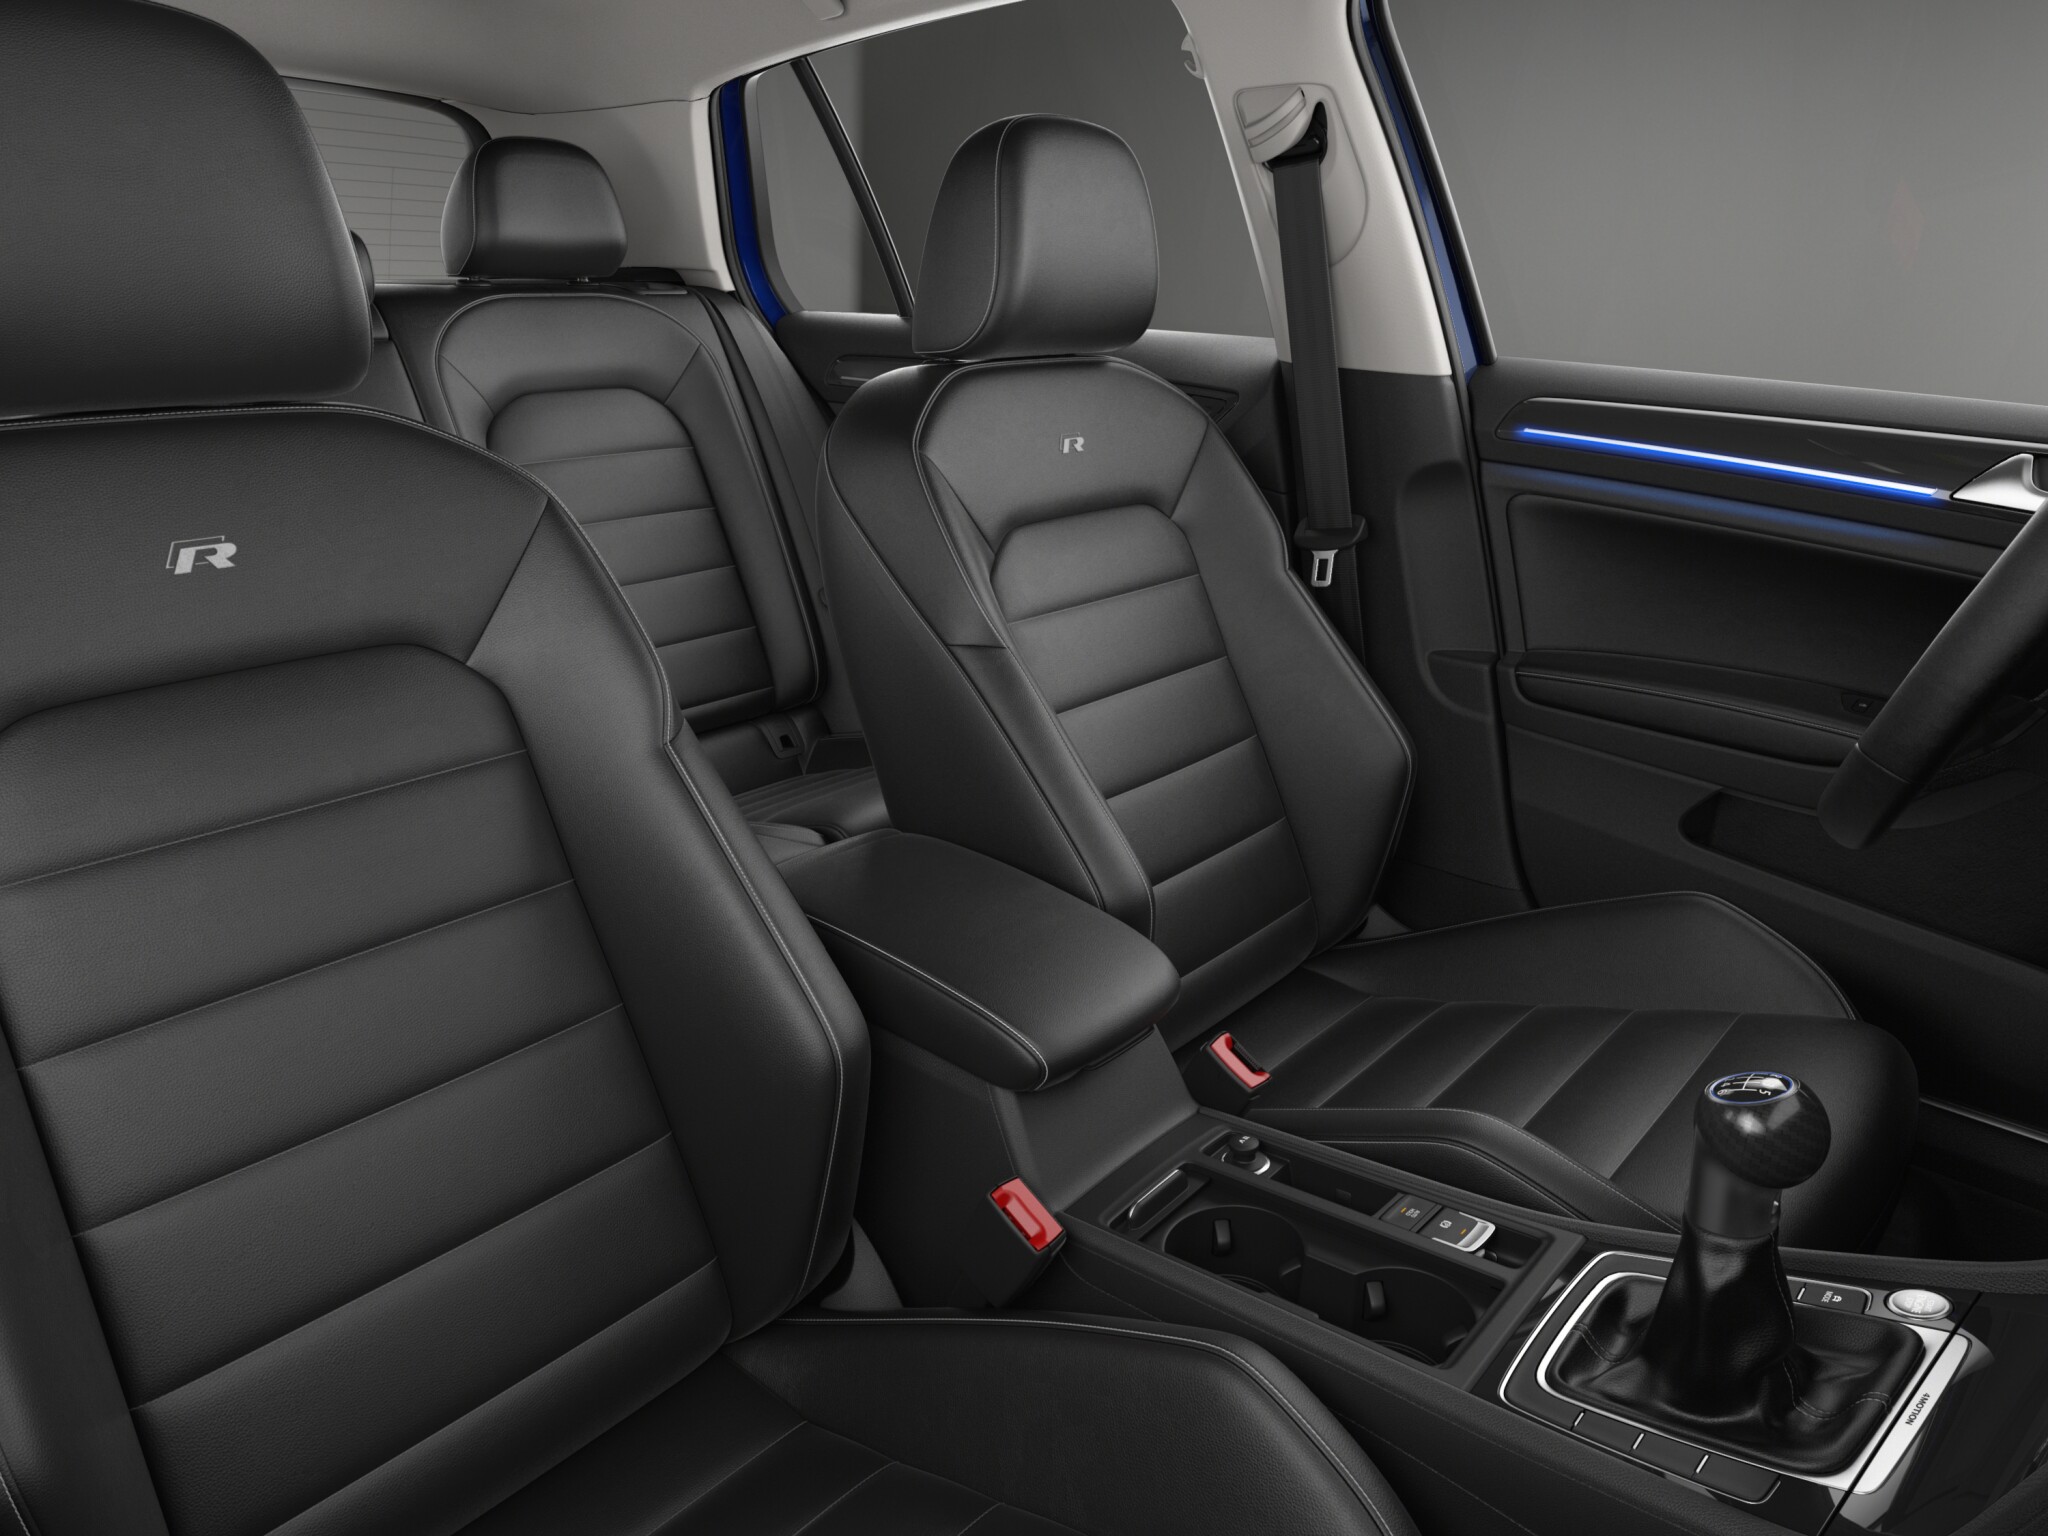 Volkswagen Golf R DCC Navication front Seat view